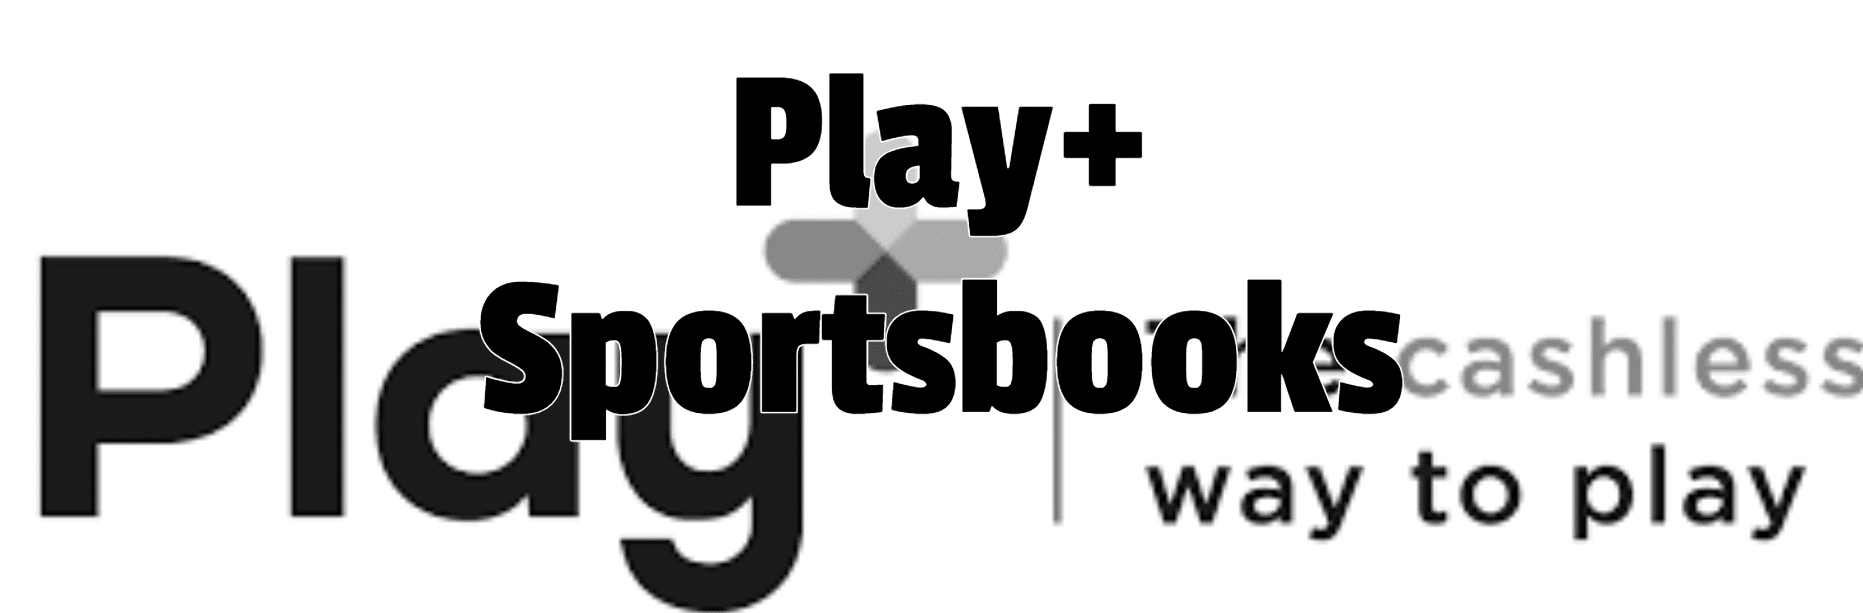 PlayPlus Betting Sites: Legal Sportsbooks Accepting Play+